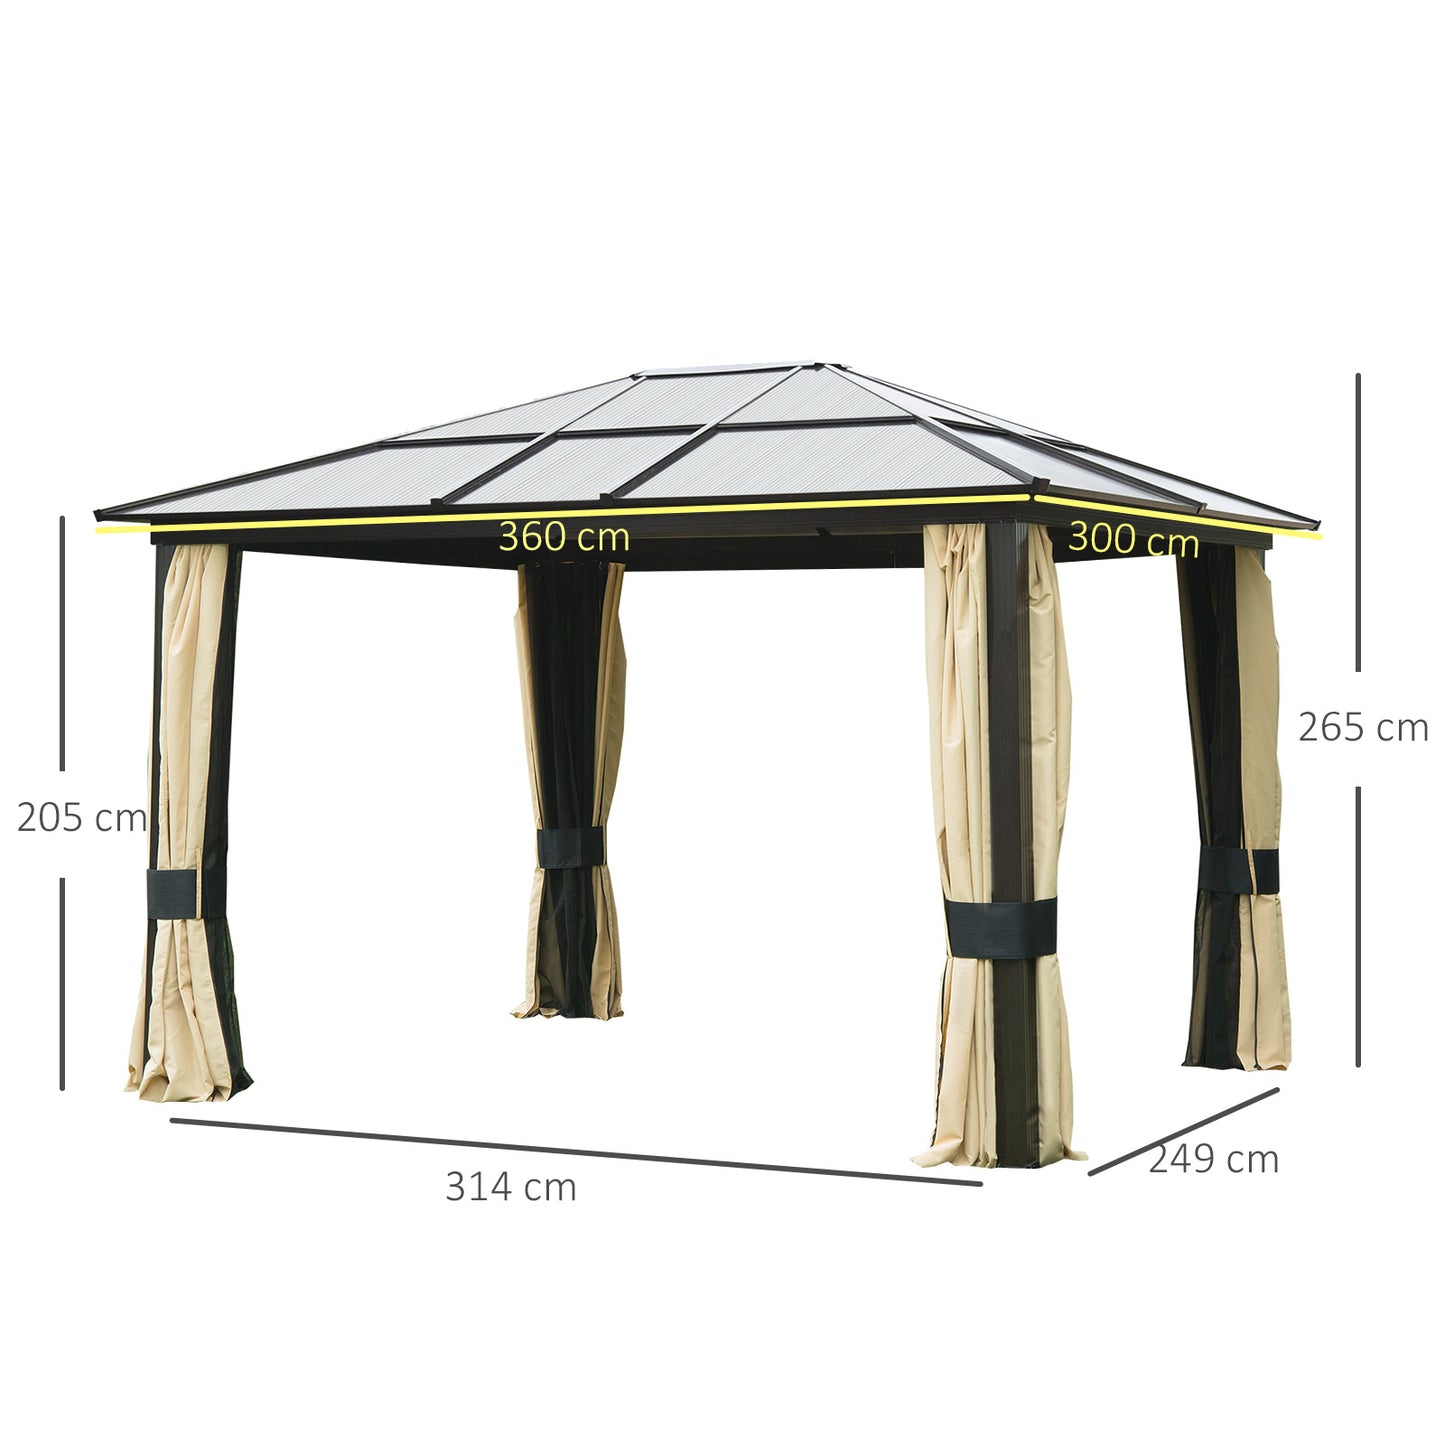 Outsunny Garden Party Tent Aluminum Gazebo Canopy Brown/Beige 3x3,6 m Patio Marquee Hardtop Roof Shelter Outdoor Pavilion Event w/ Mesh & Side Walls Top Cover